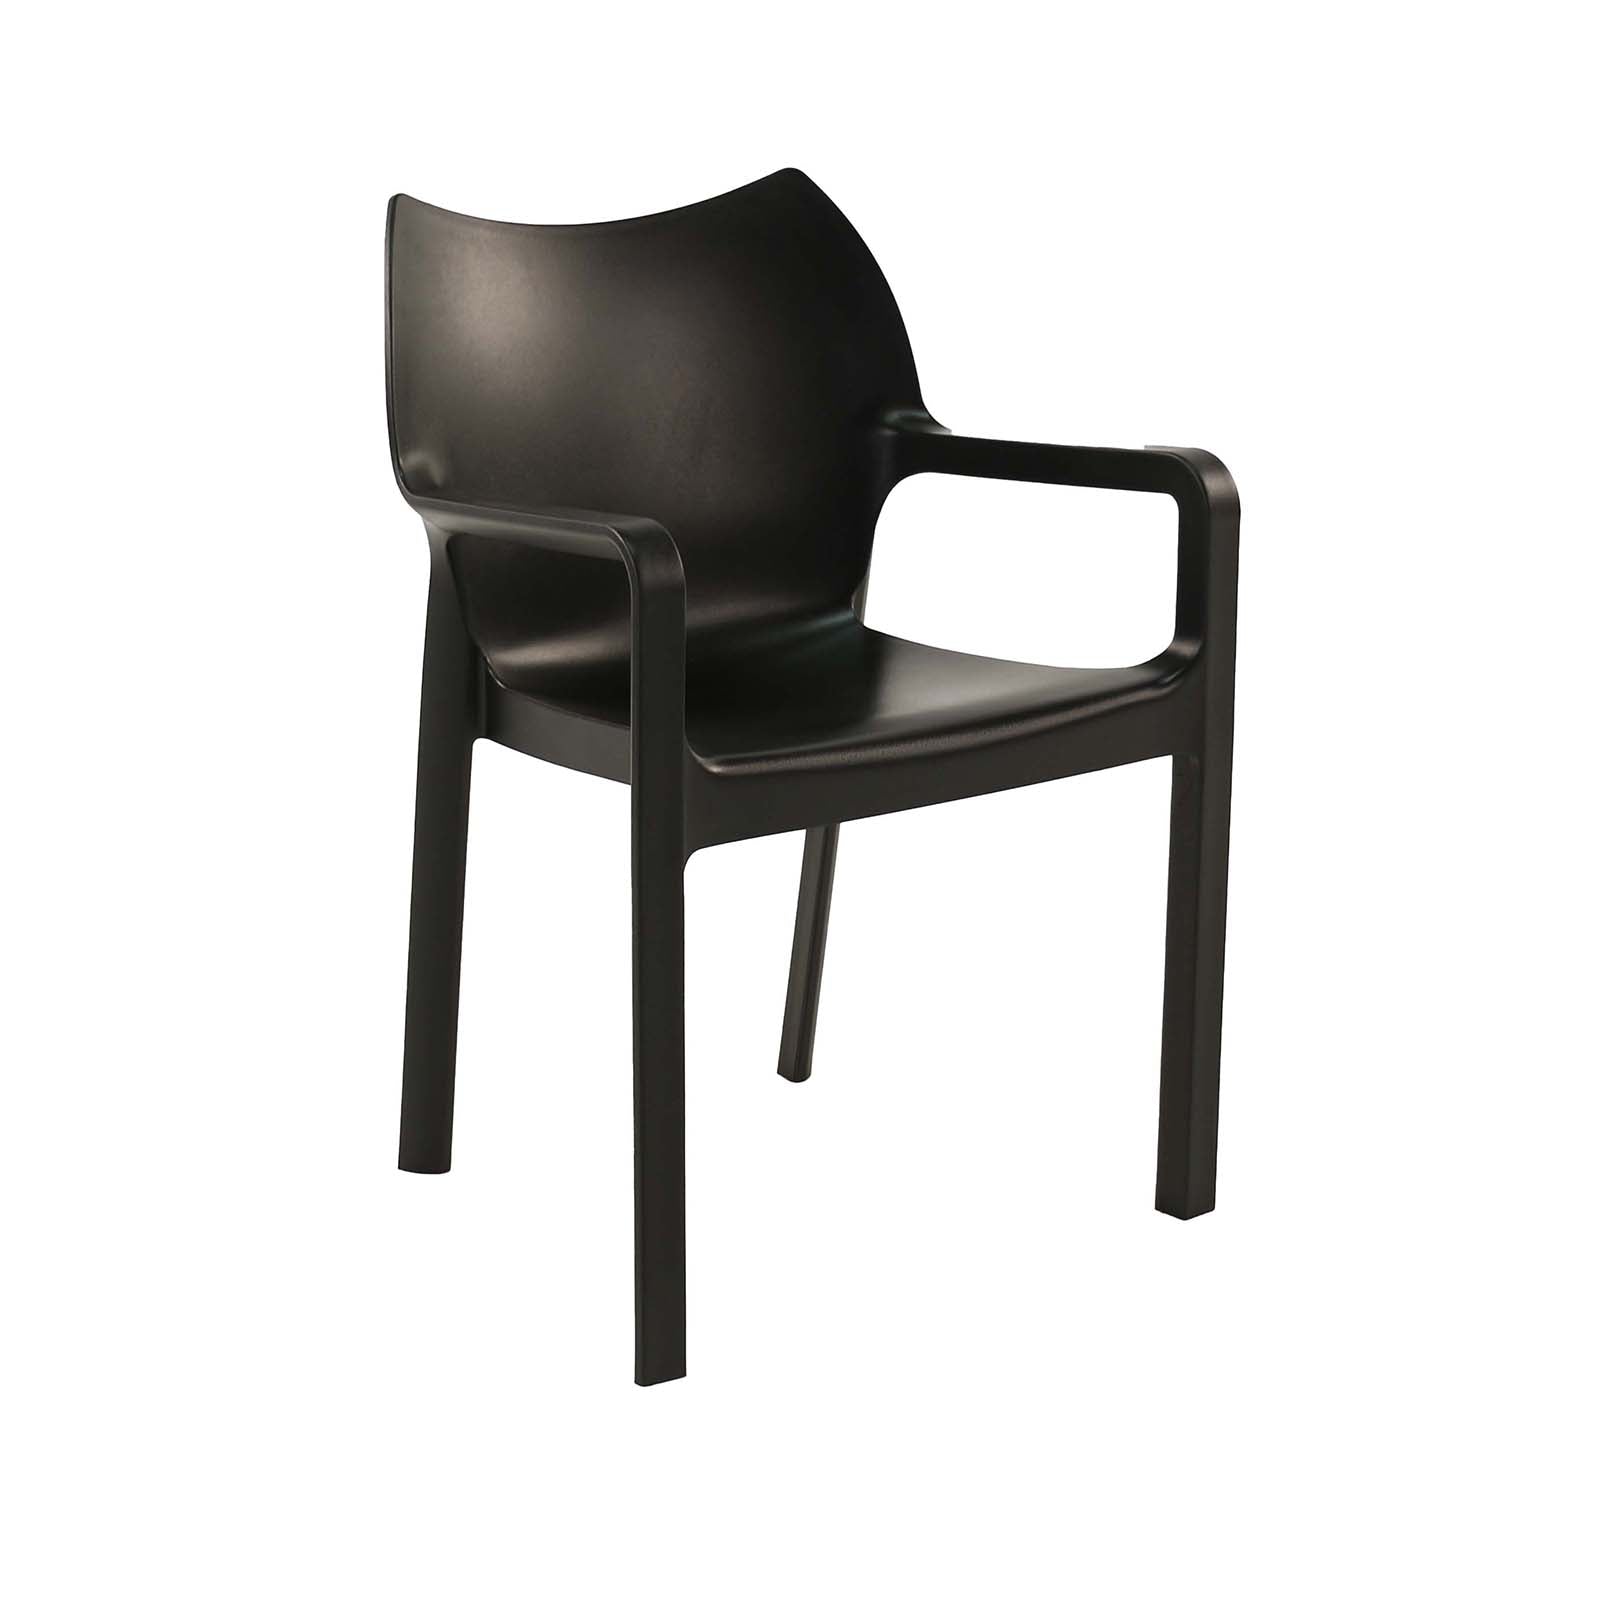 Design Warehouse Cape Cafe Dining Chair front angle 124518